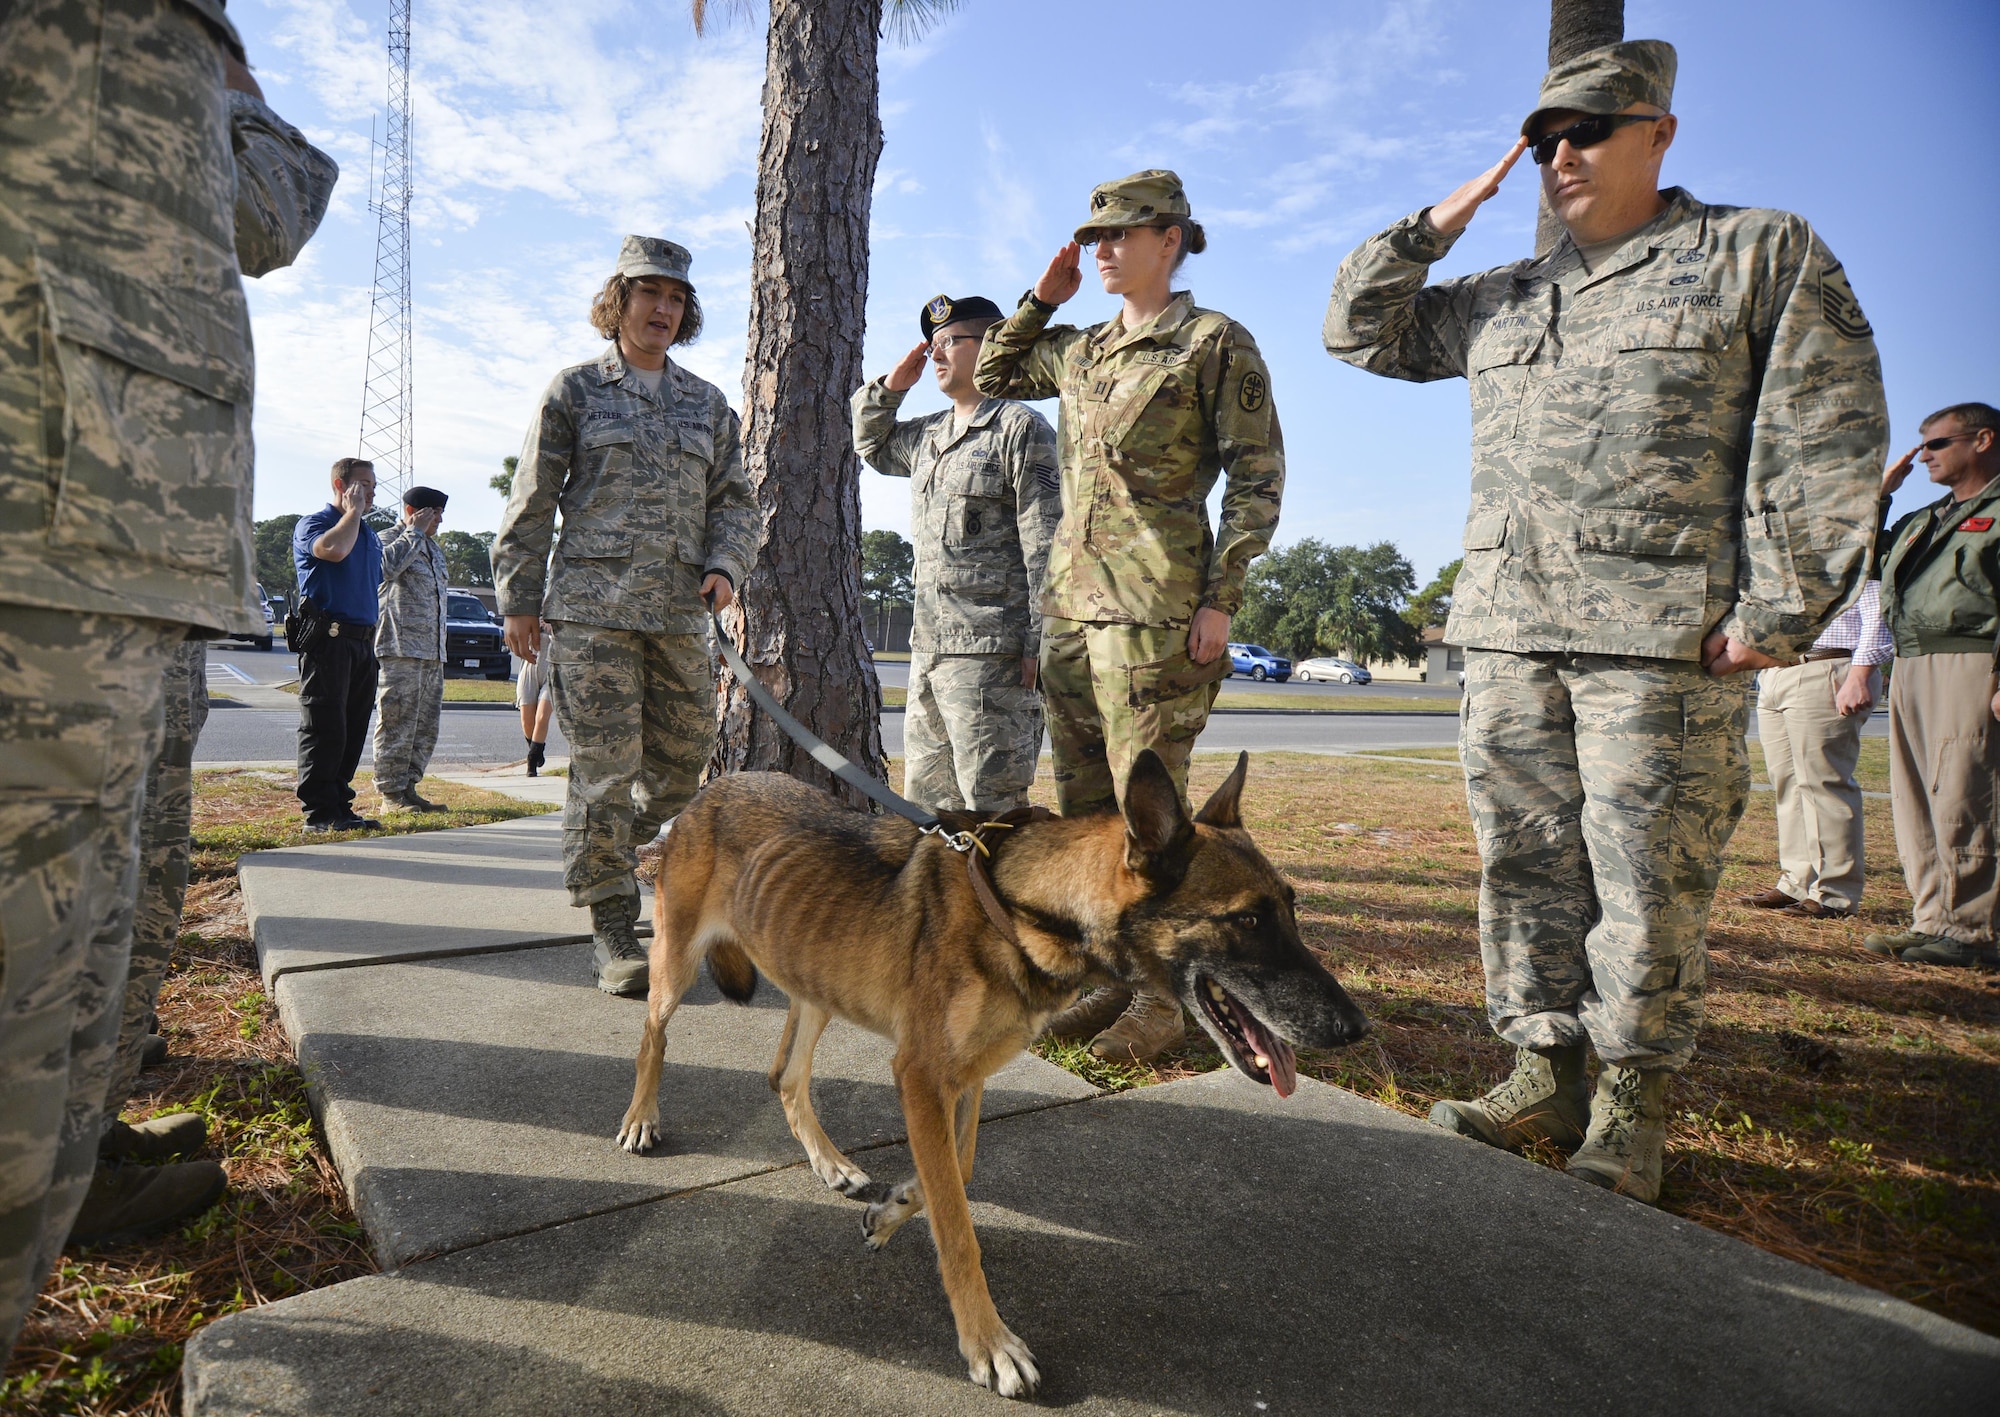 Tyndall Airmen provide a final salute to retired U.S. Air Force Military Working Dog, Mica T204, at the end of her final patrol Nov. 14, 2016 at Tyndall Air Force Base. Mica provided over 4,500 hours of counter-explosive operations and installation protection for more than 45 air assets and 7,000 military, civilian, and retired personnel. (U.S. Air Force photo by Tech. Sgt. Javier Cruz/Released)